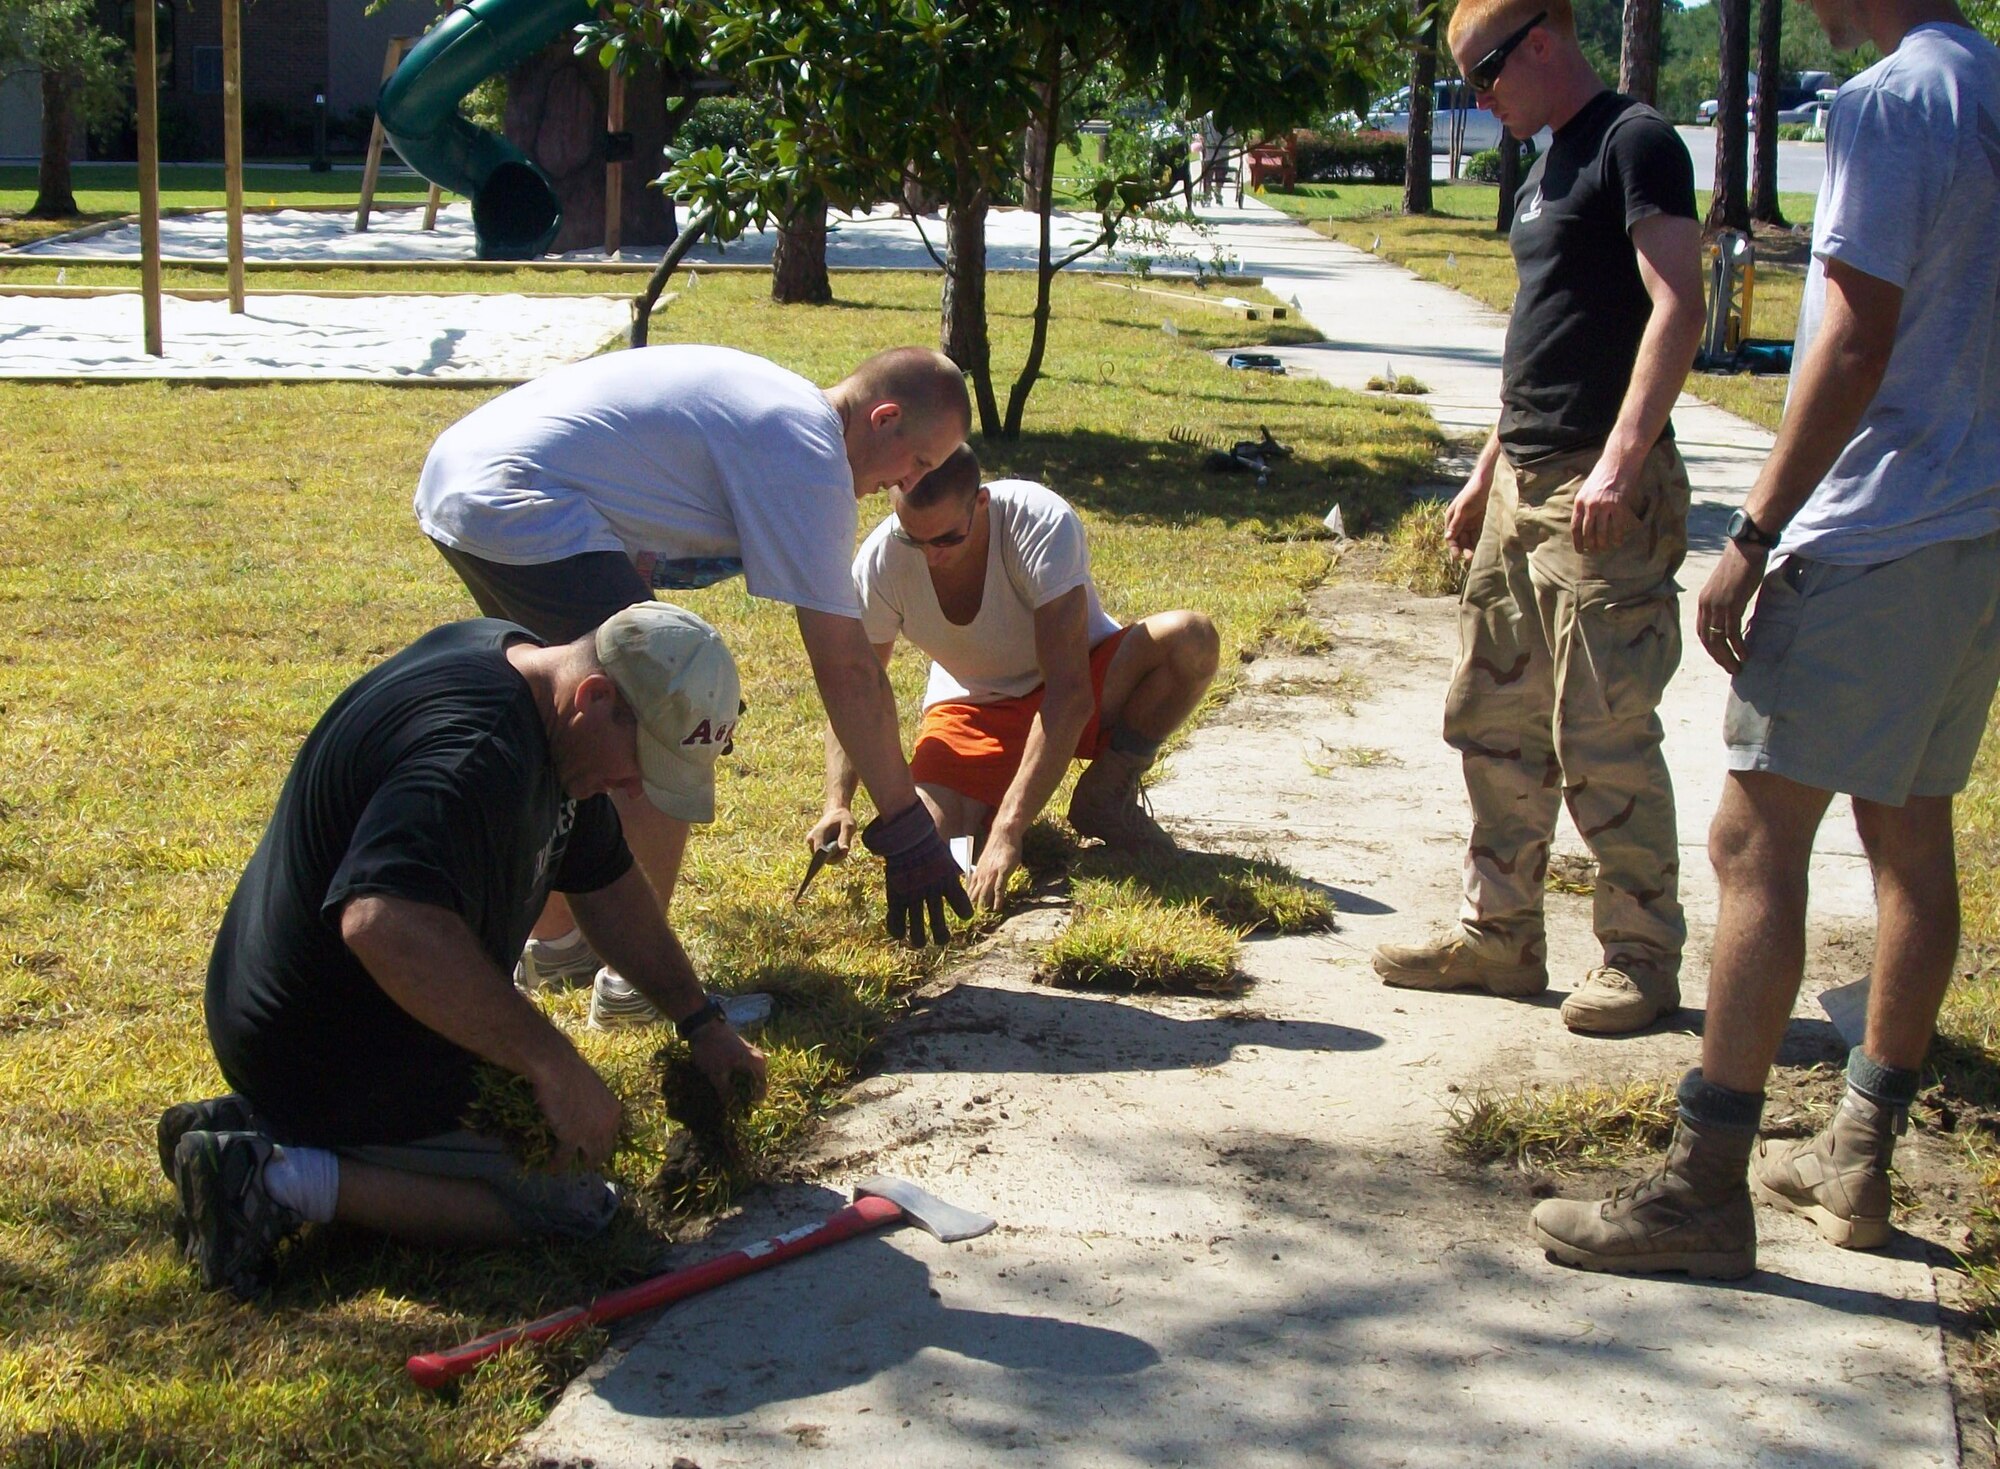 Tactical Air Control Party Airmen from Hurlburt Field work together to build a park for the Air Force Enlisted Village located in Shalimar, Fla., September 5, 2010. (Courtesy photo)